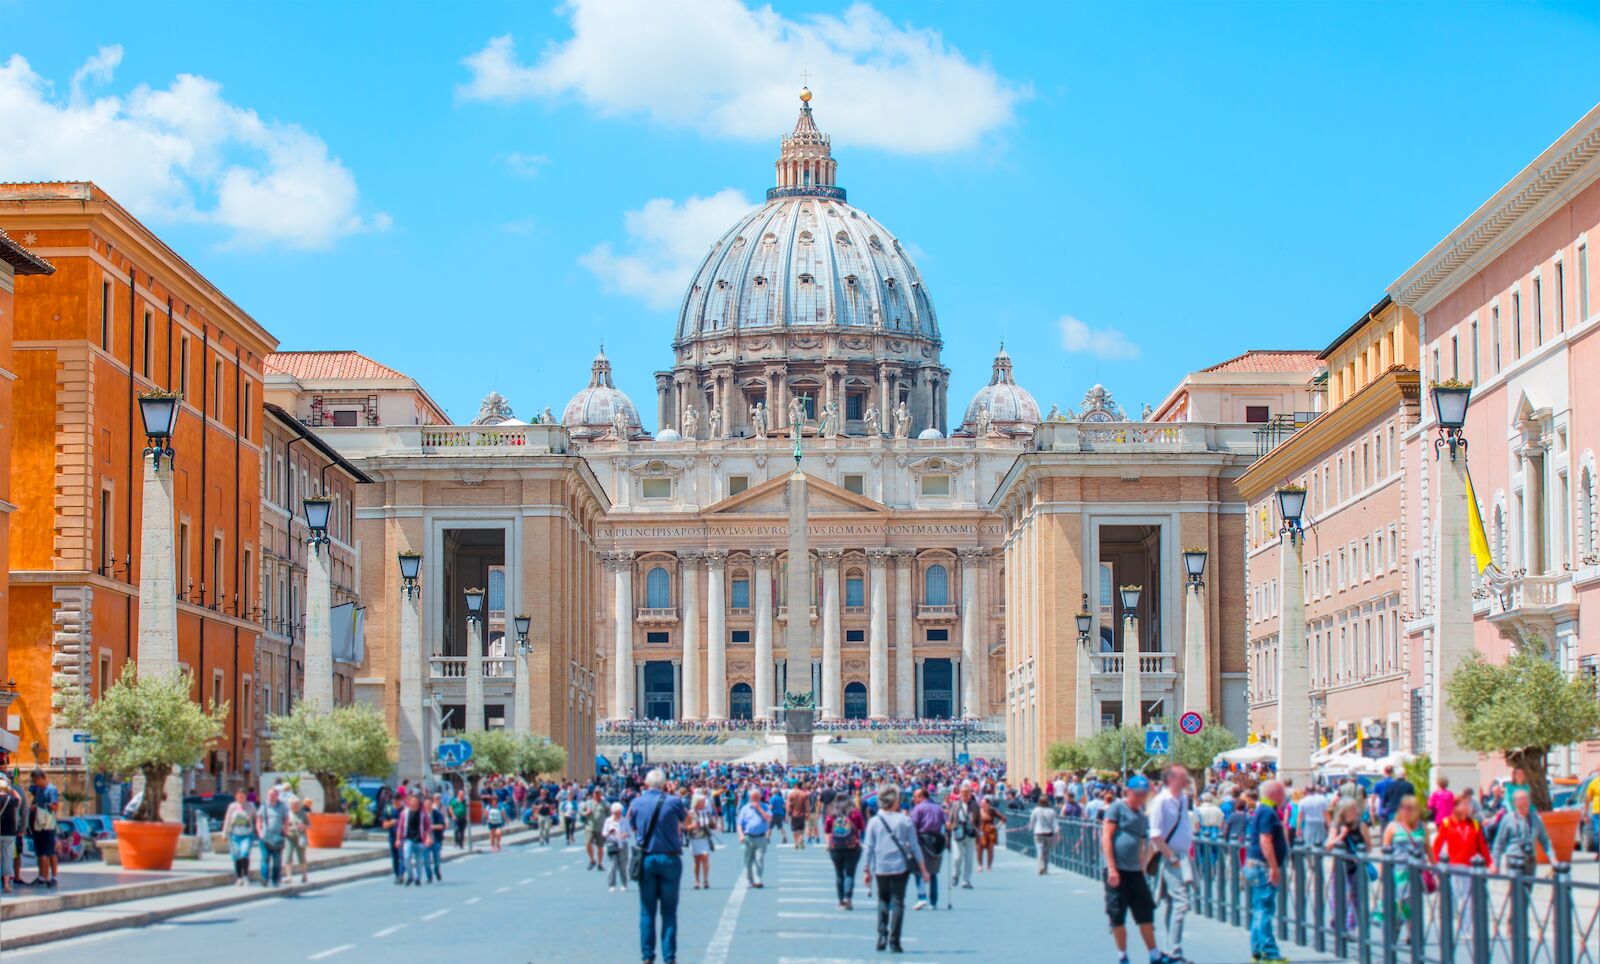 Entrance to Vatican City and view of St. Peter's Basilica